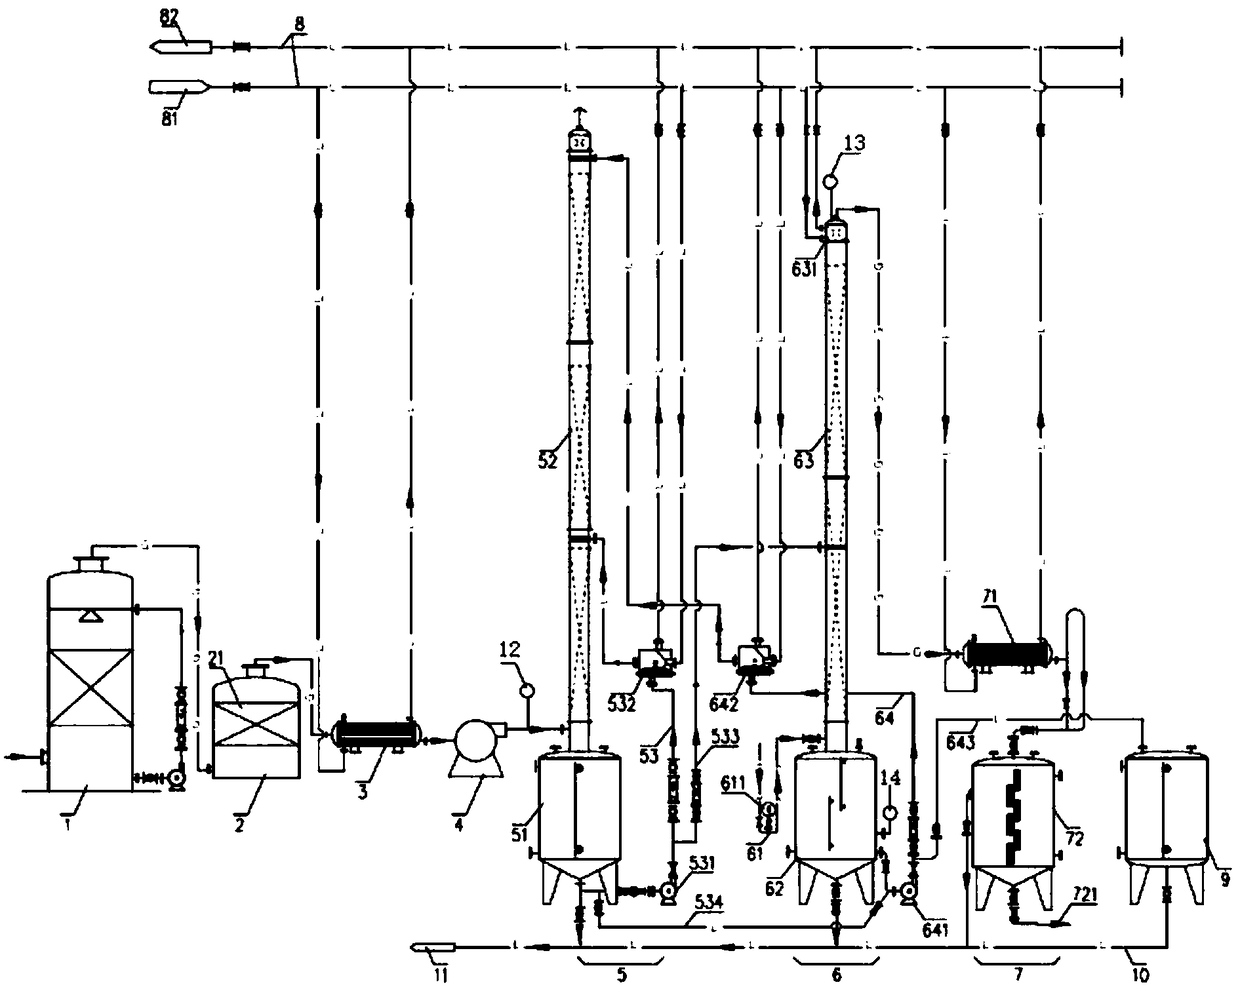 Purification and recovery system for dichloromethane waste gas